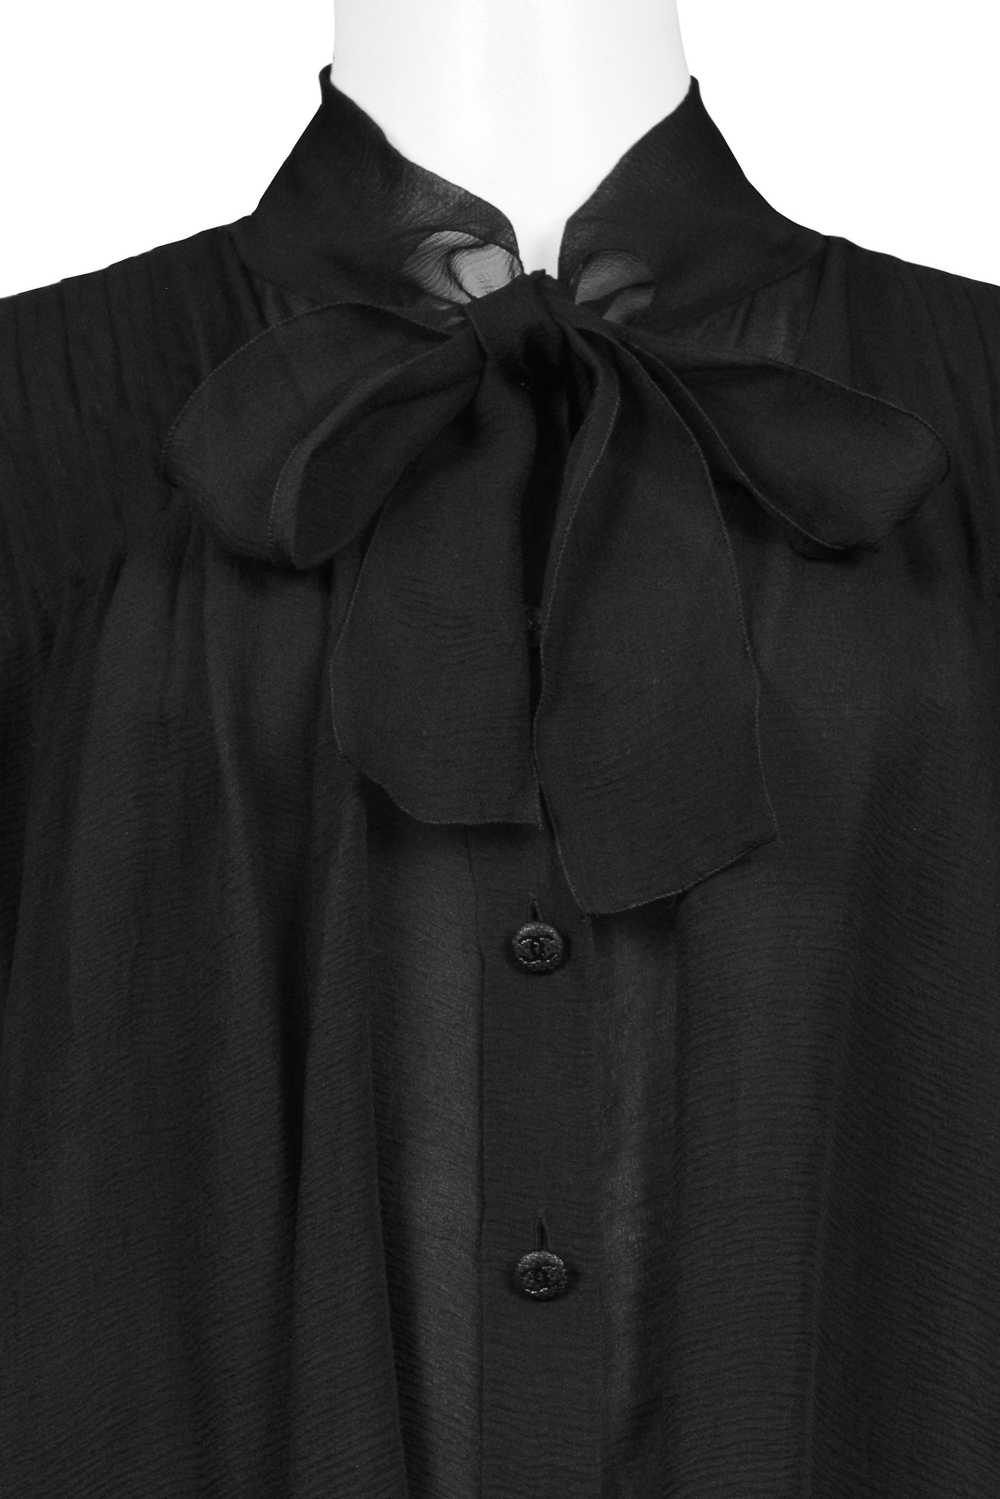 CHANEL BY KARL LAGERFELD BLACK CHIFFON PUSSY BOW … - image 2